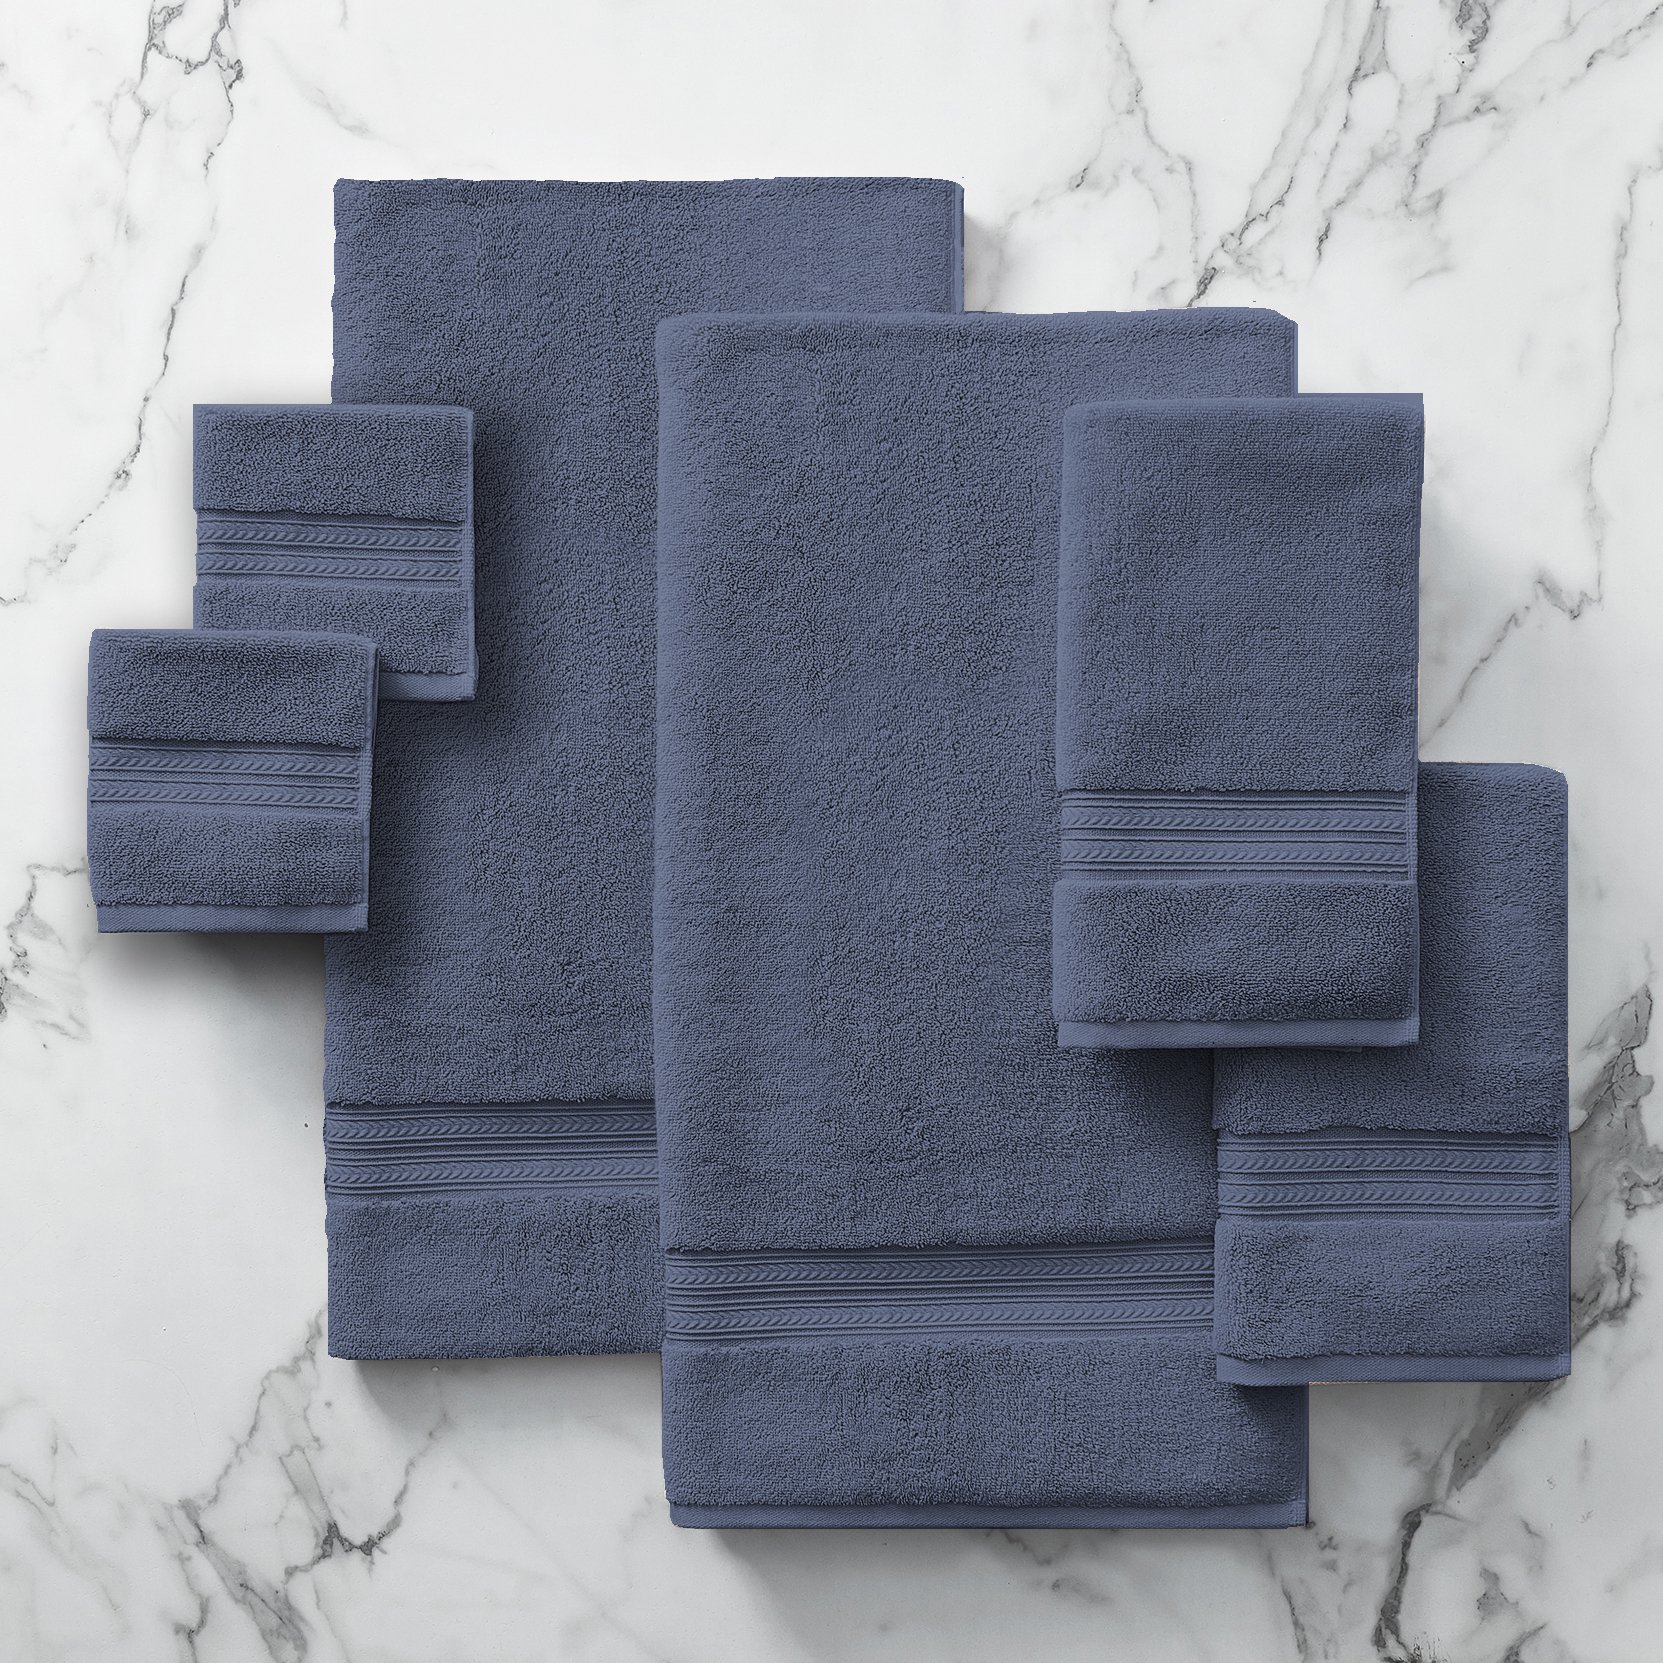 Insignia Blue 6PC Bath Towel Set, Better Homes & Gardens Thick and Plush Collection - image 3 of 5